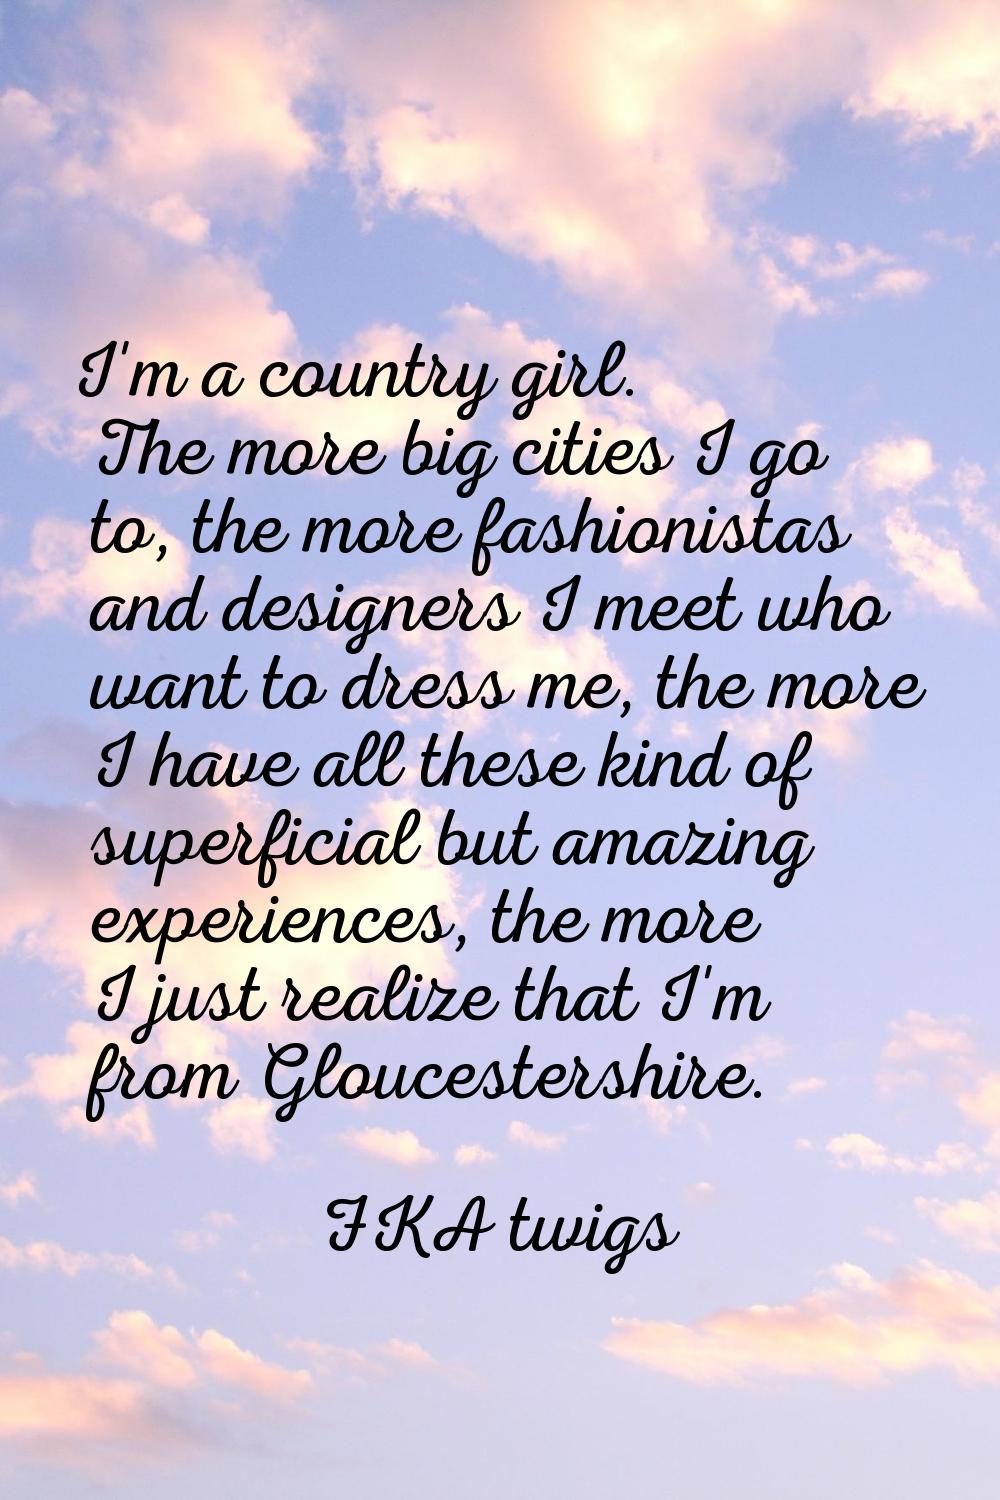 I'm a country girl. The more big cities I go to, the more fashionistas and designers I meet who wan